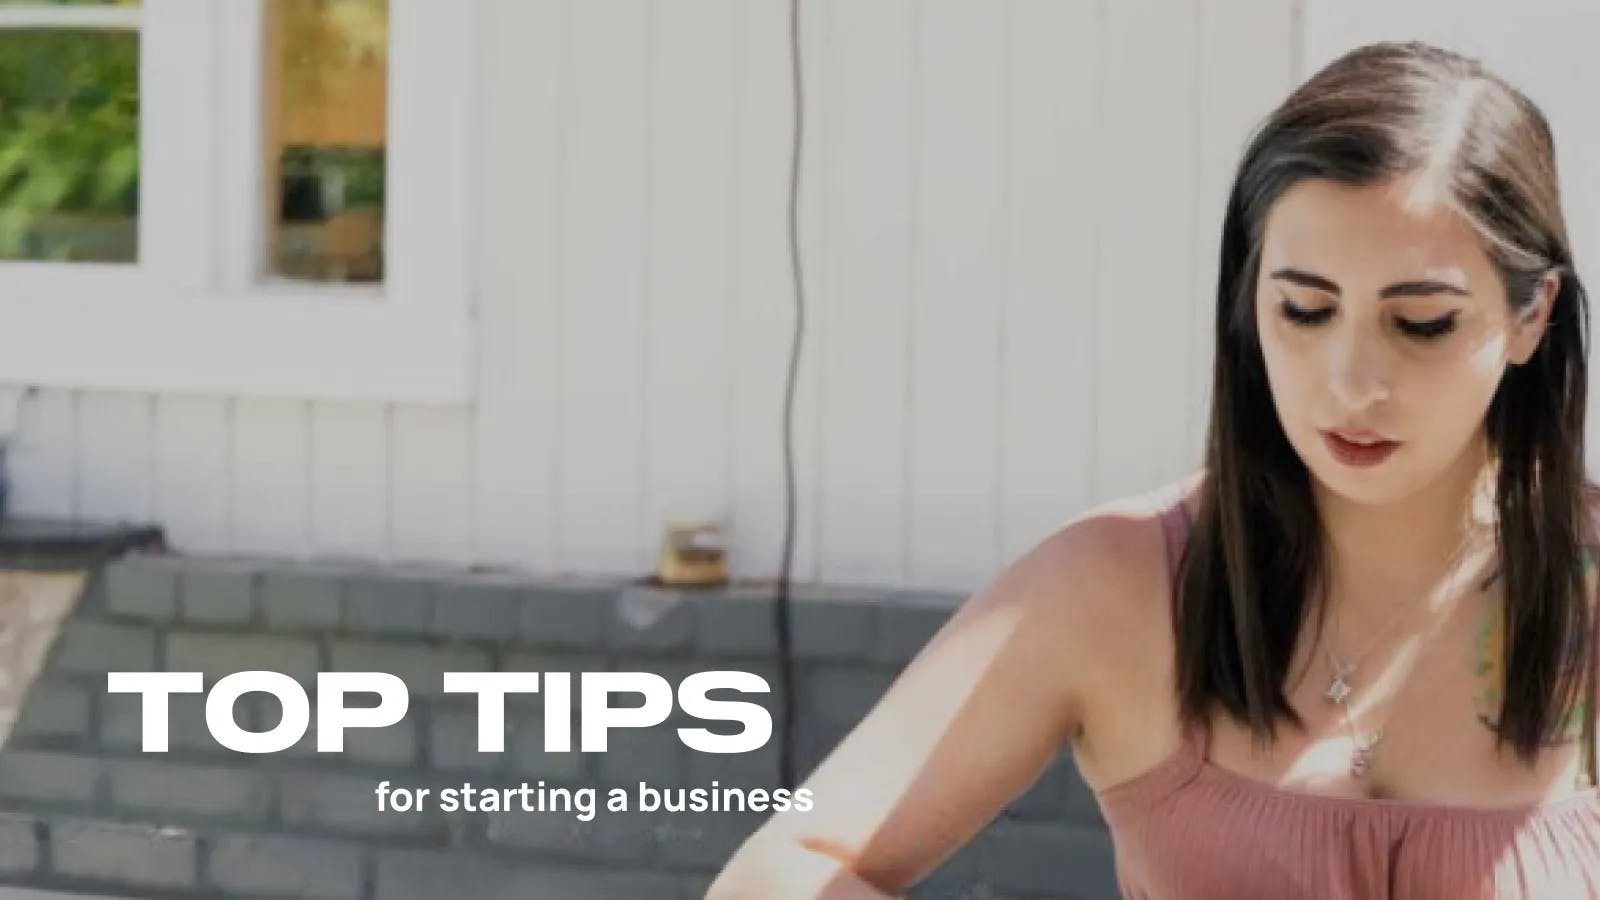 Isa’s Top Tips for Starting a Business